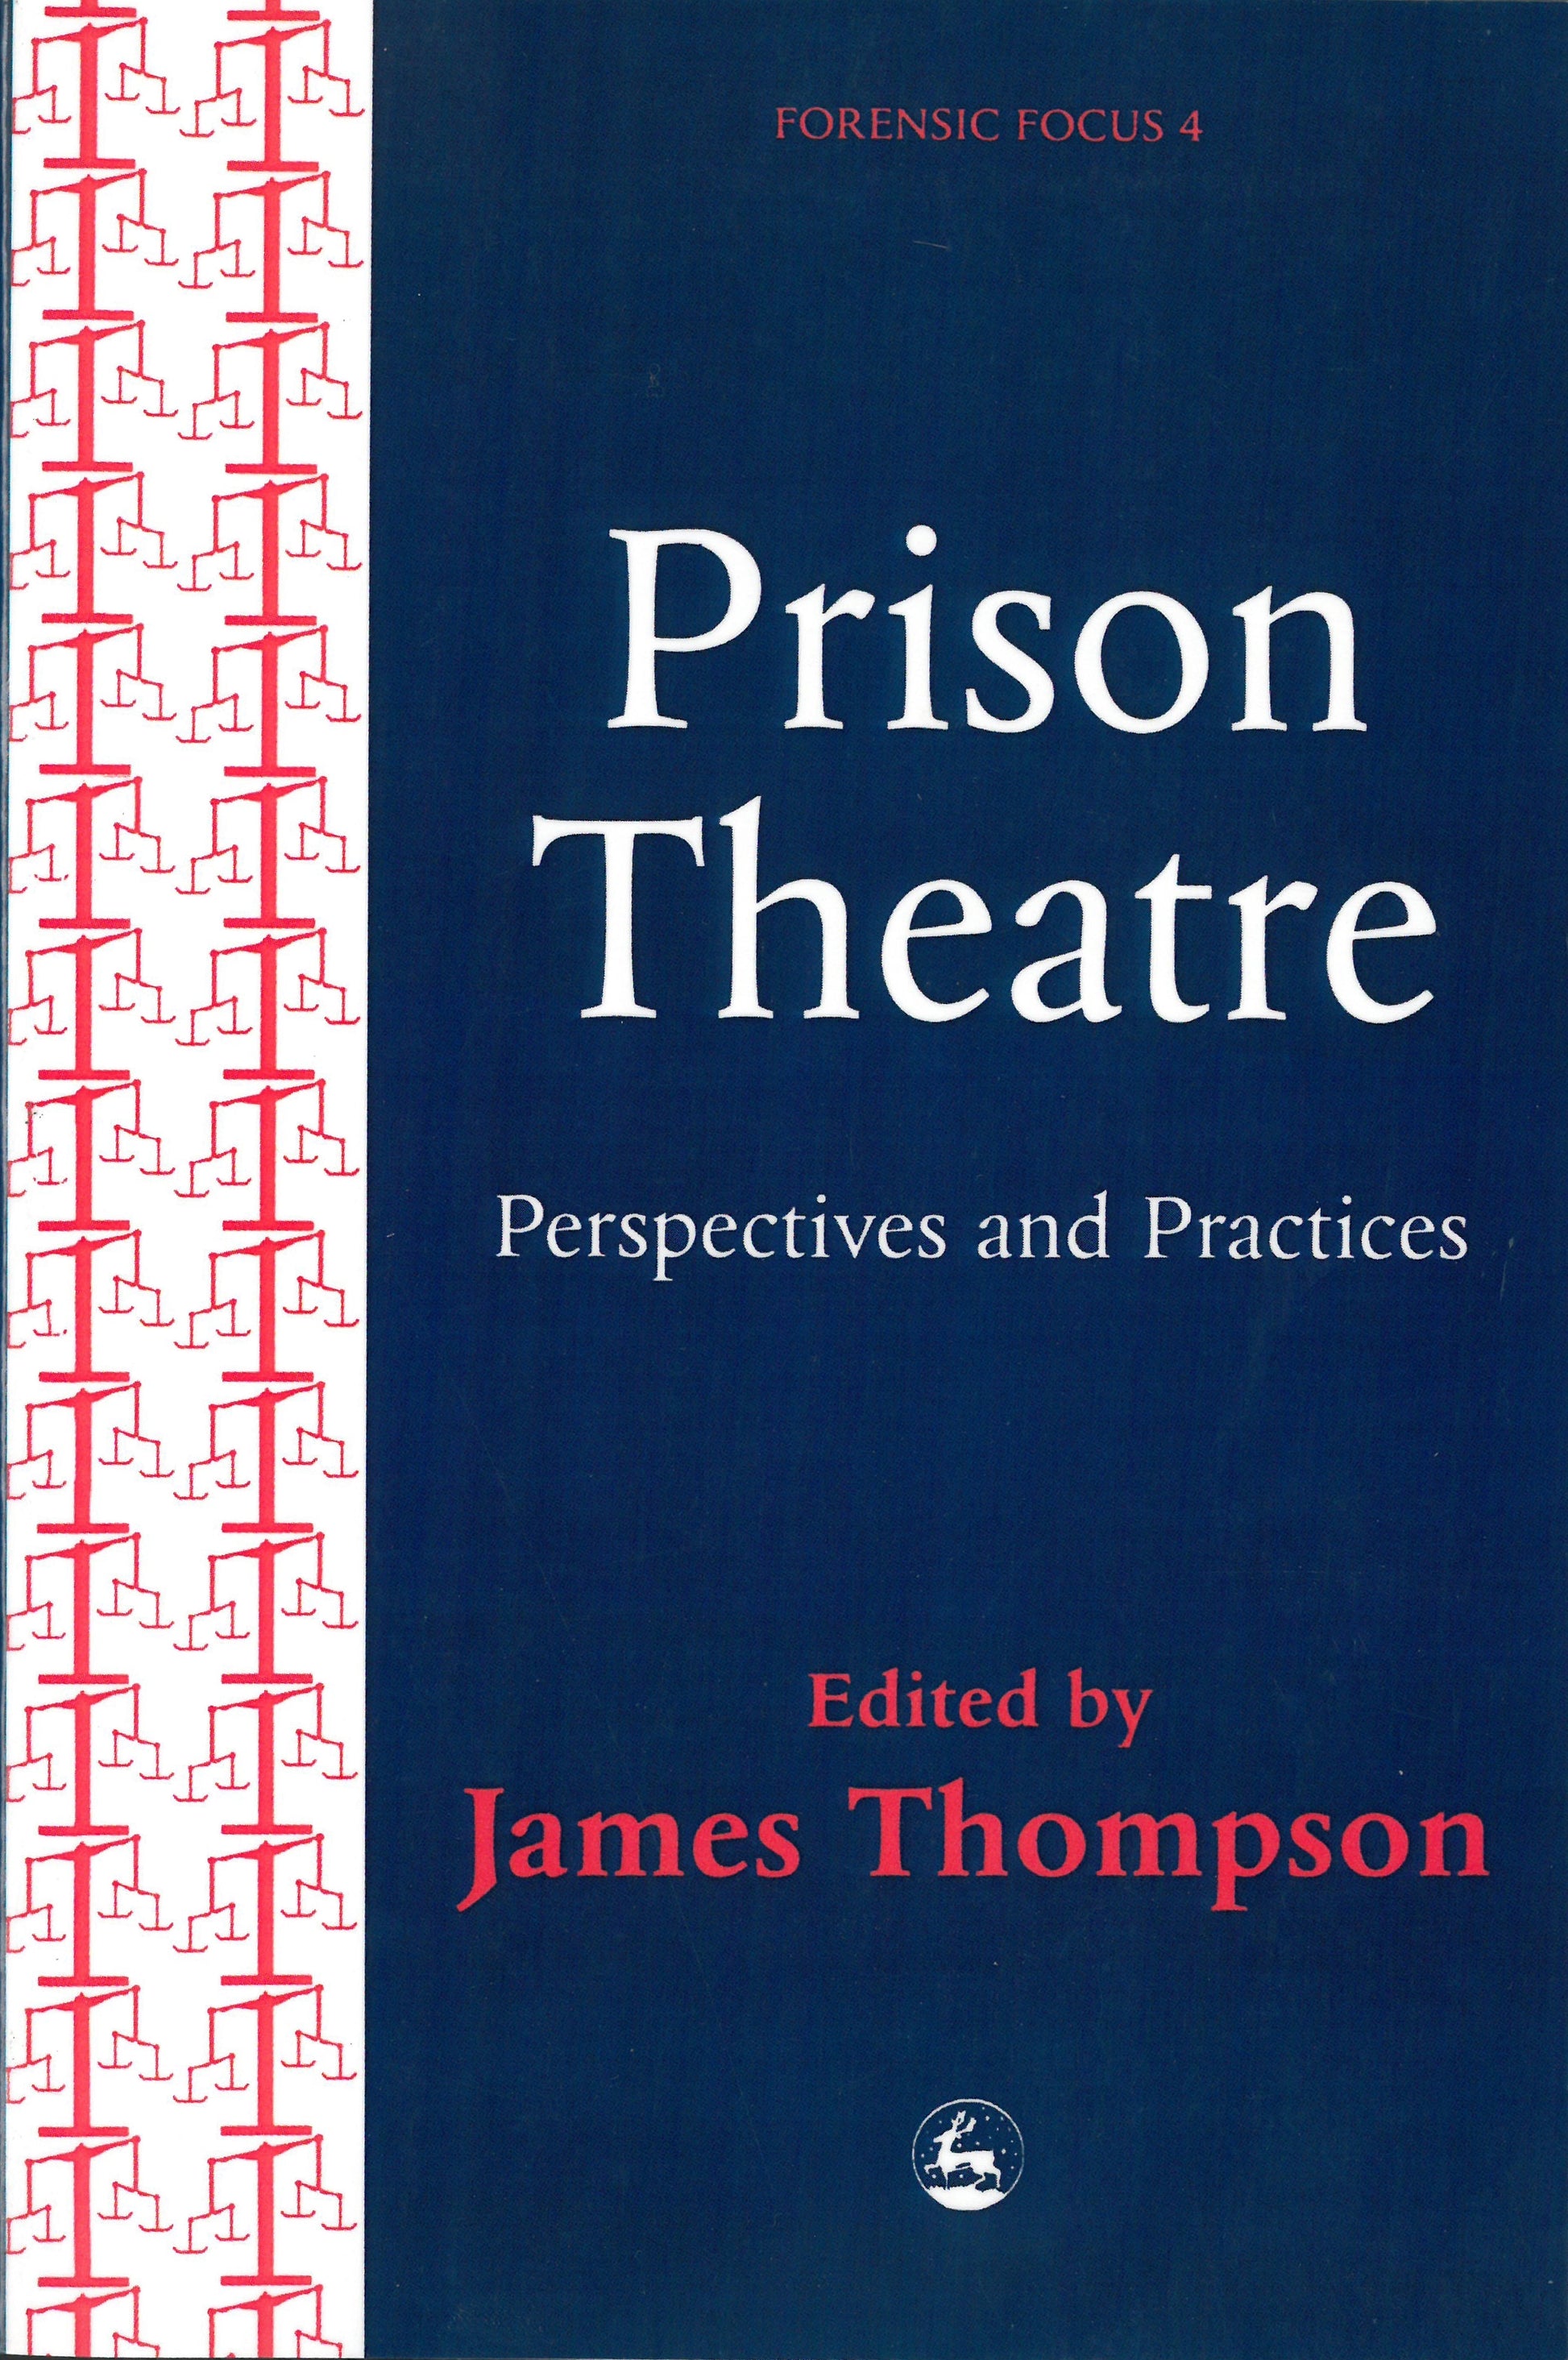 Prison Theatre by James Thompson, No Author Listed